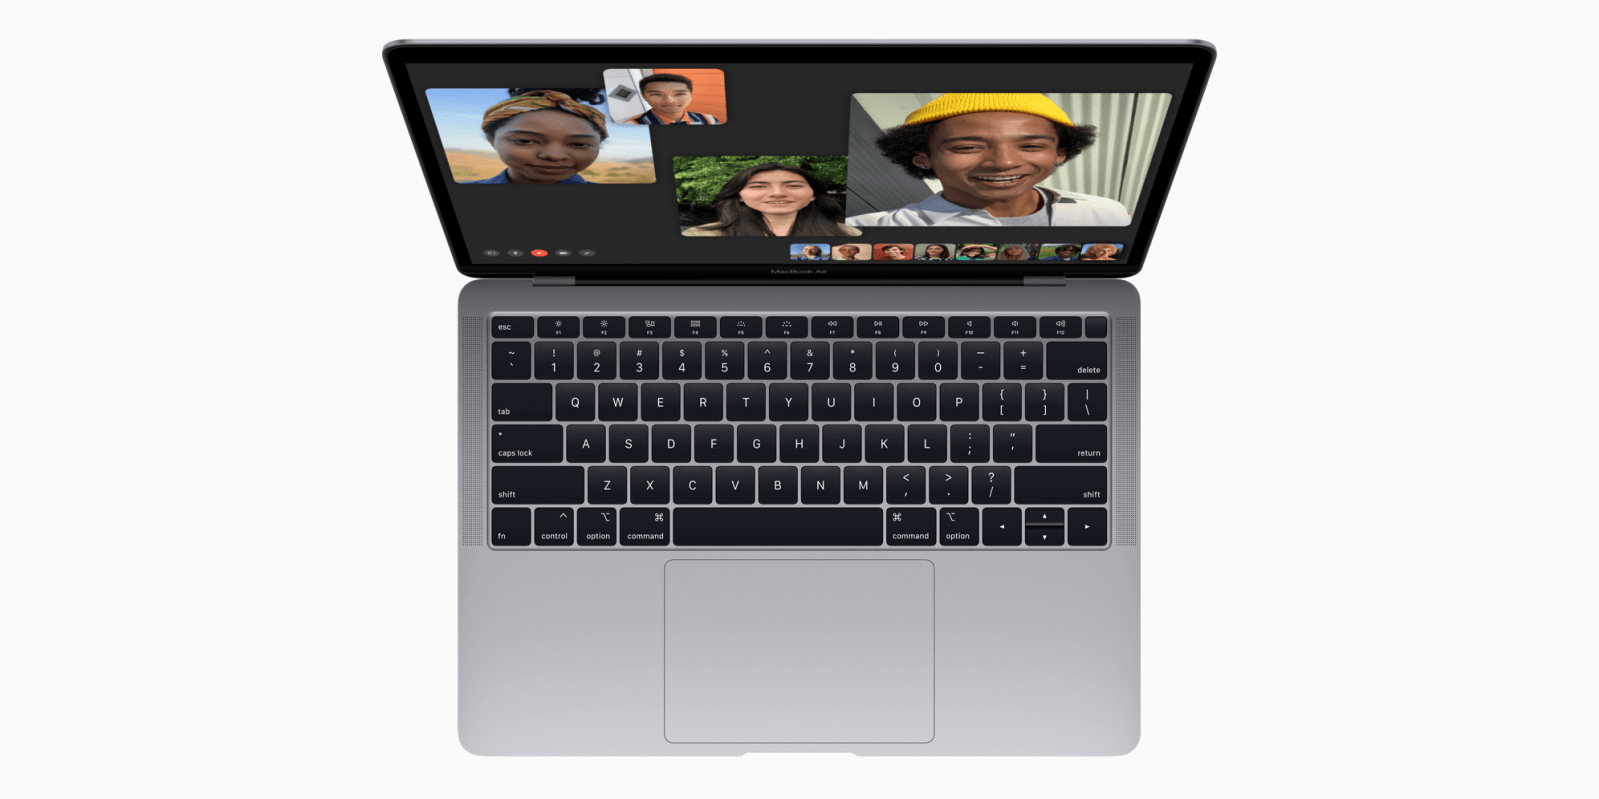 The new, cheaper, MacBook Air includes ~35% slower SSD compared to